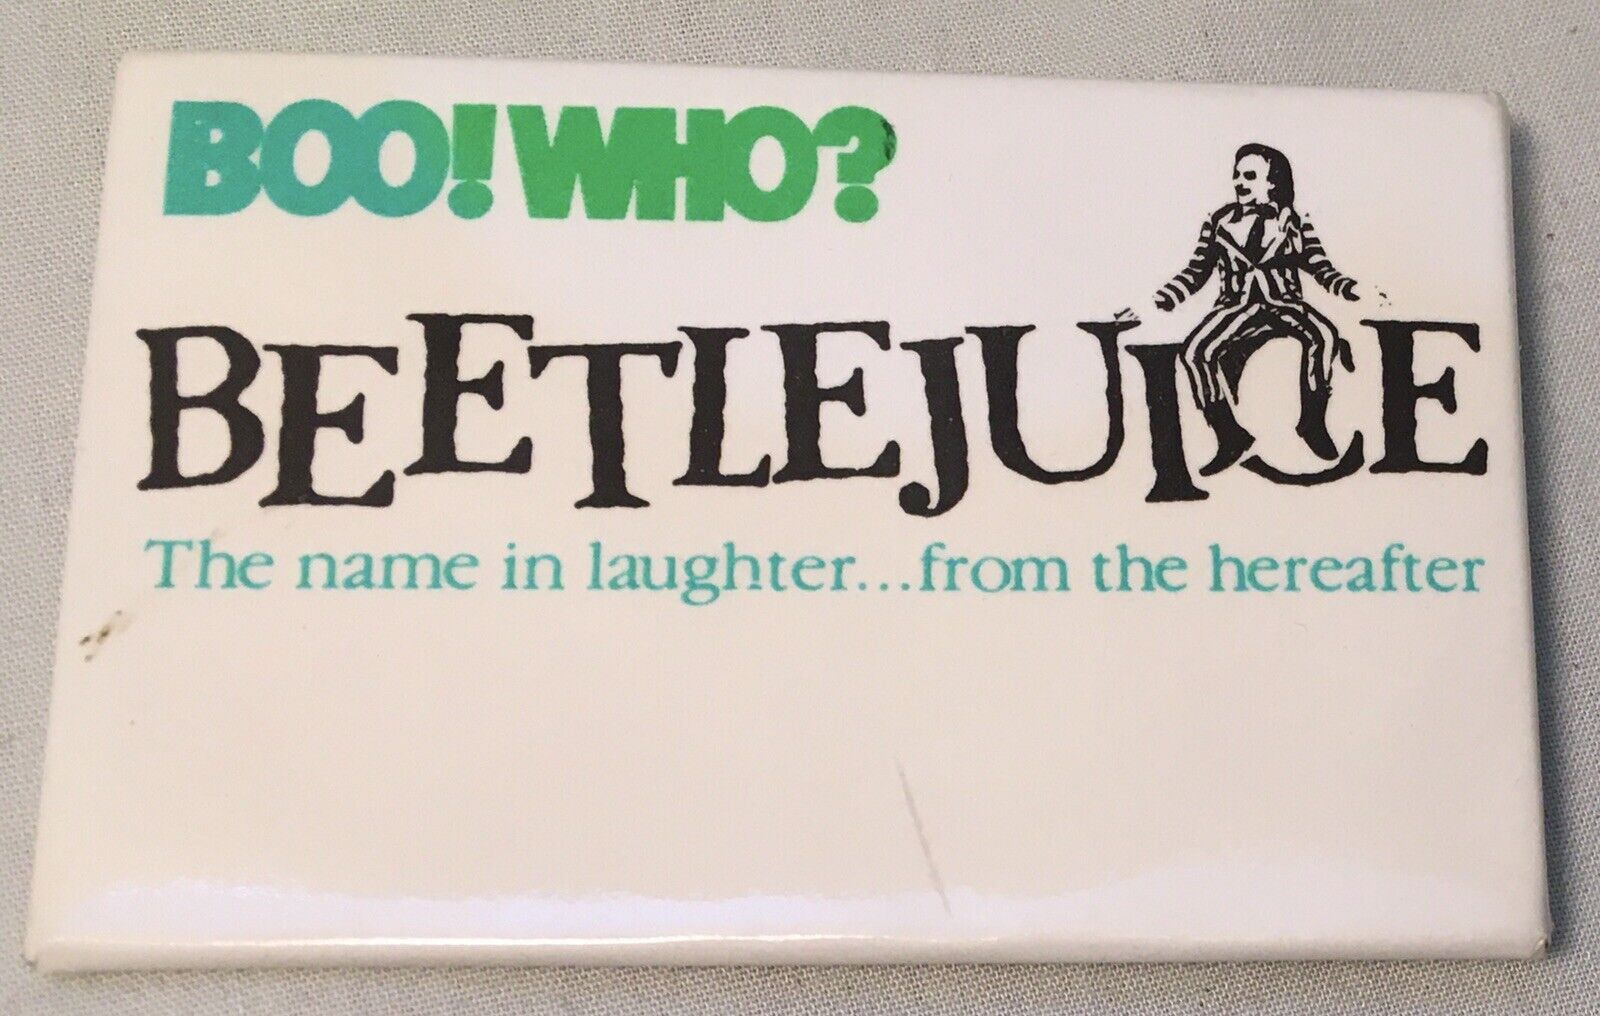 Vintage Beetlejuice Square Pinback Button 3”x2” Boo Who The Name In Laughter..